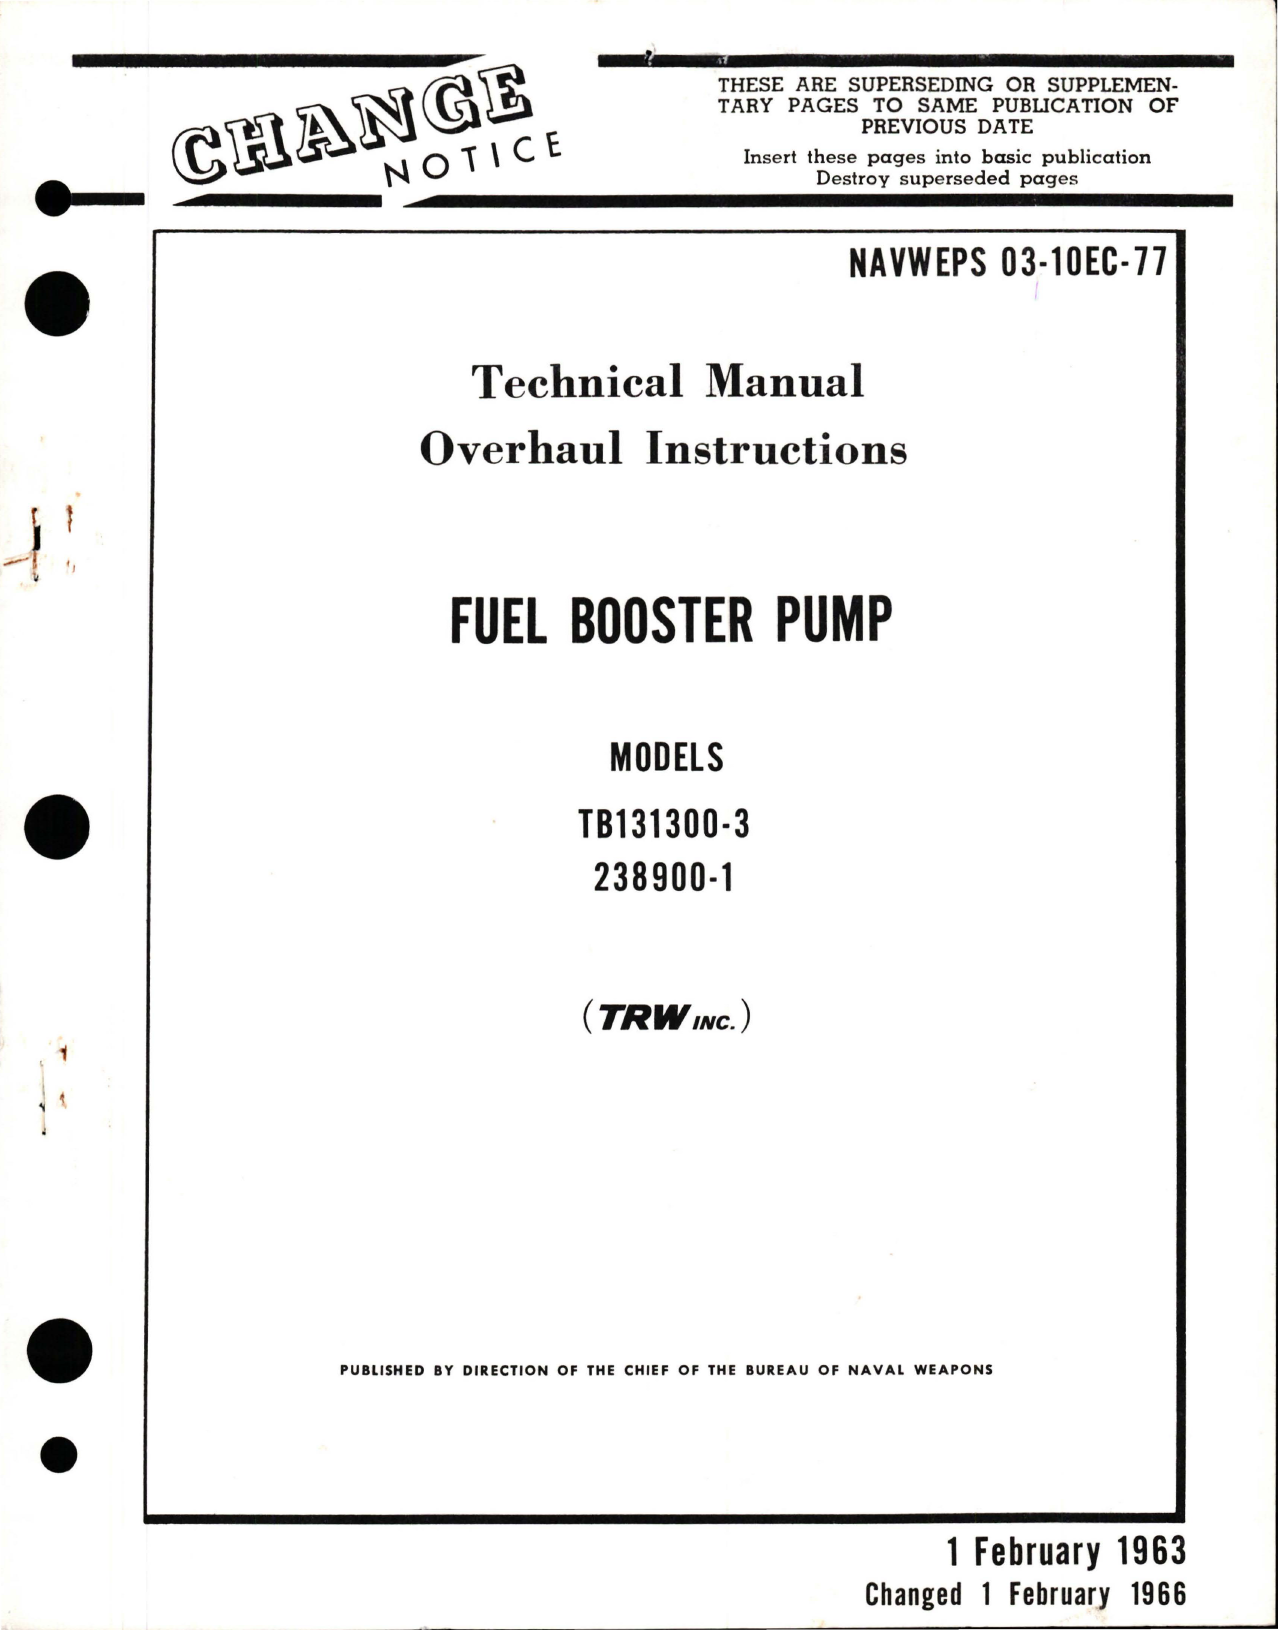 Sample page 1 from AirCorps Library document: Overhaul Instructions for Fuel Booster Pump - Models TB131300-3 and 238900-1